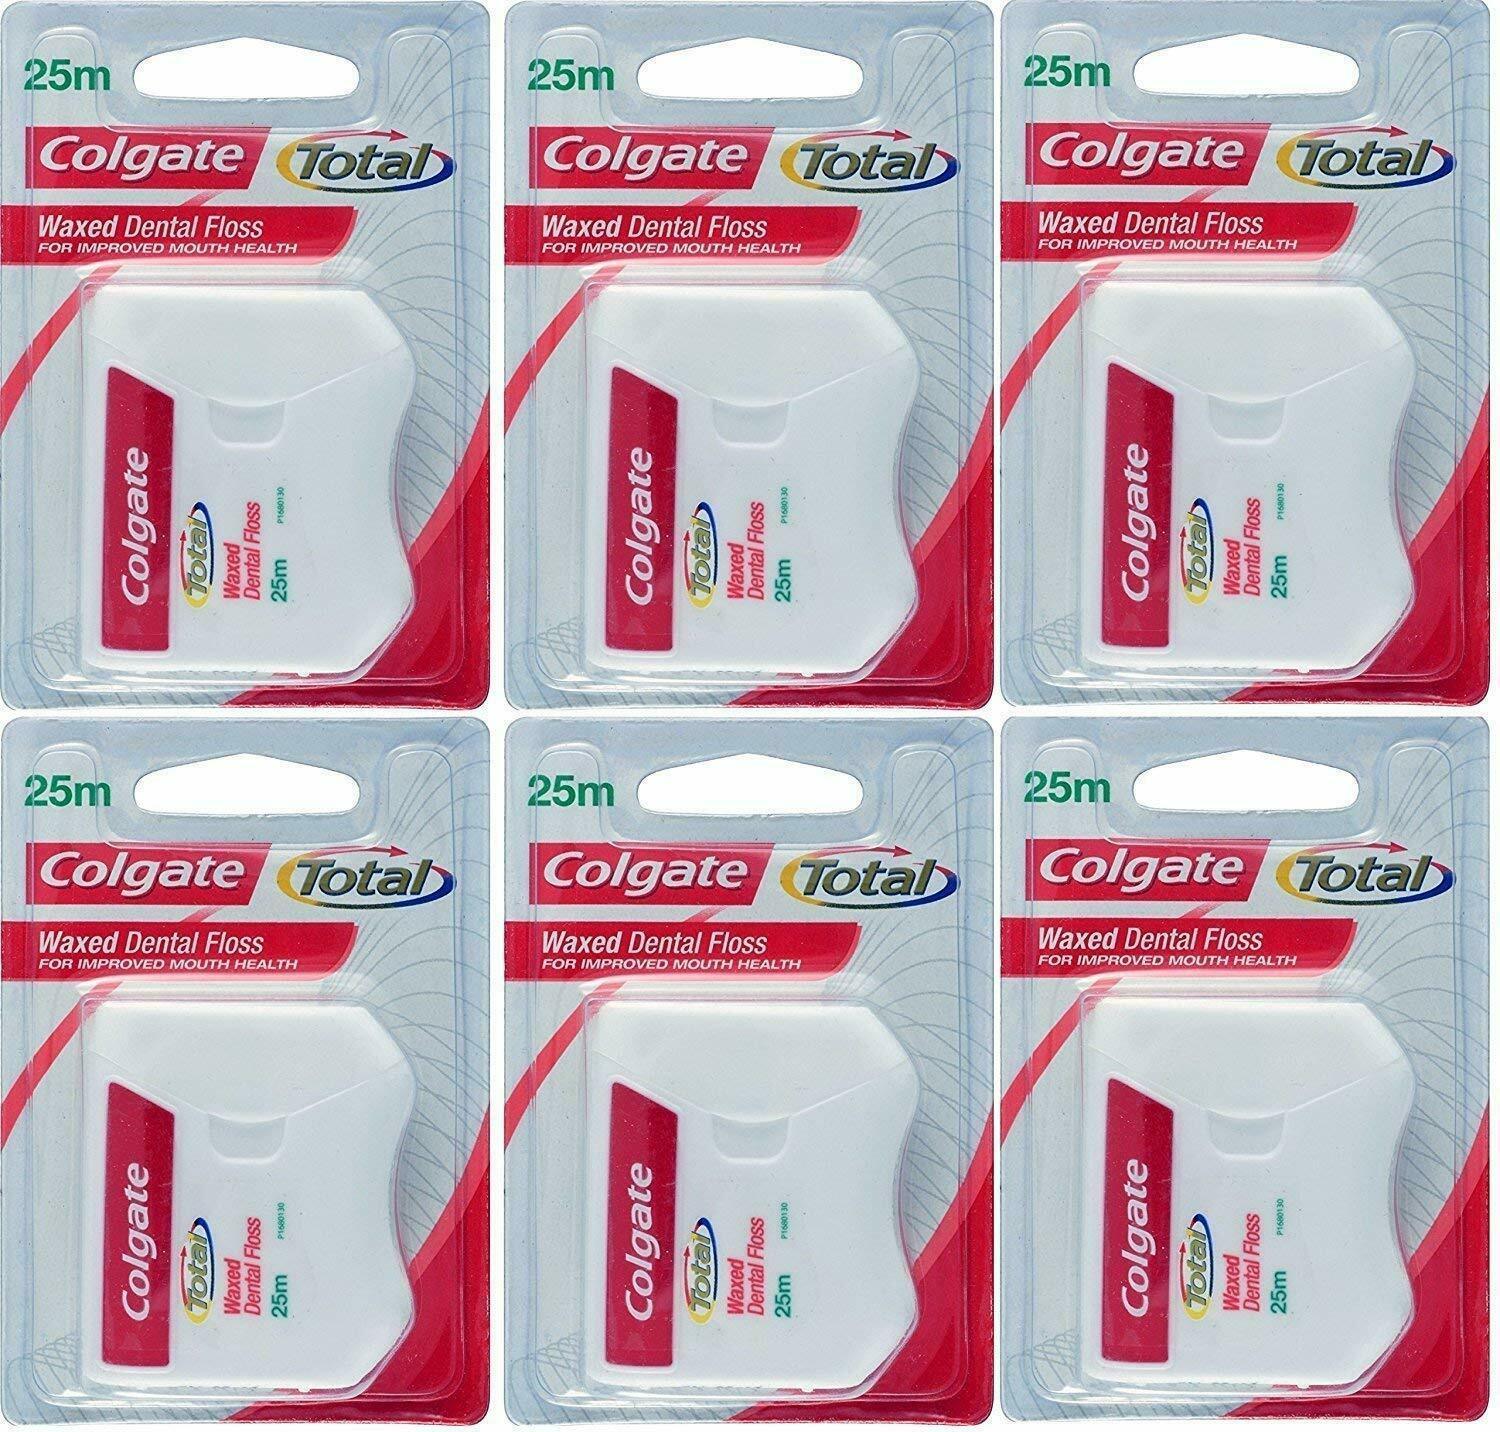 6 x Colgate Waxed Dental Floss 25mtrs For Improved Mouth Health